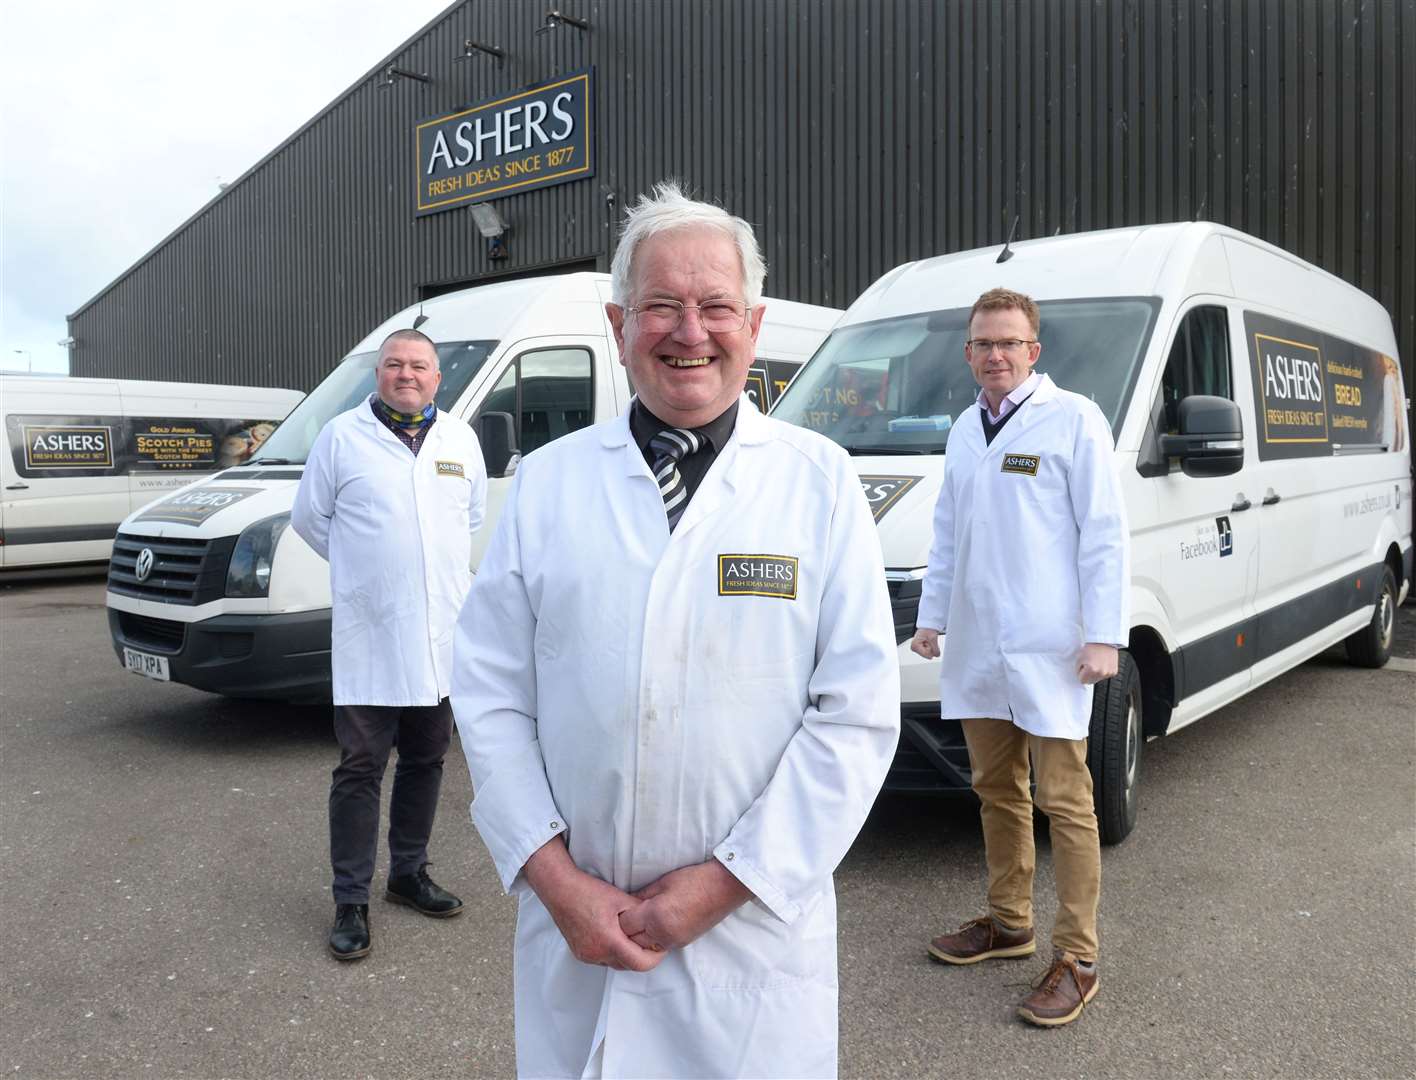 Ashers' Robbie Sommerville, who has work at the bakery for 40years, with owners Ali Asher, left, and George Asher. Picture: Gary Anthony